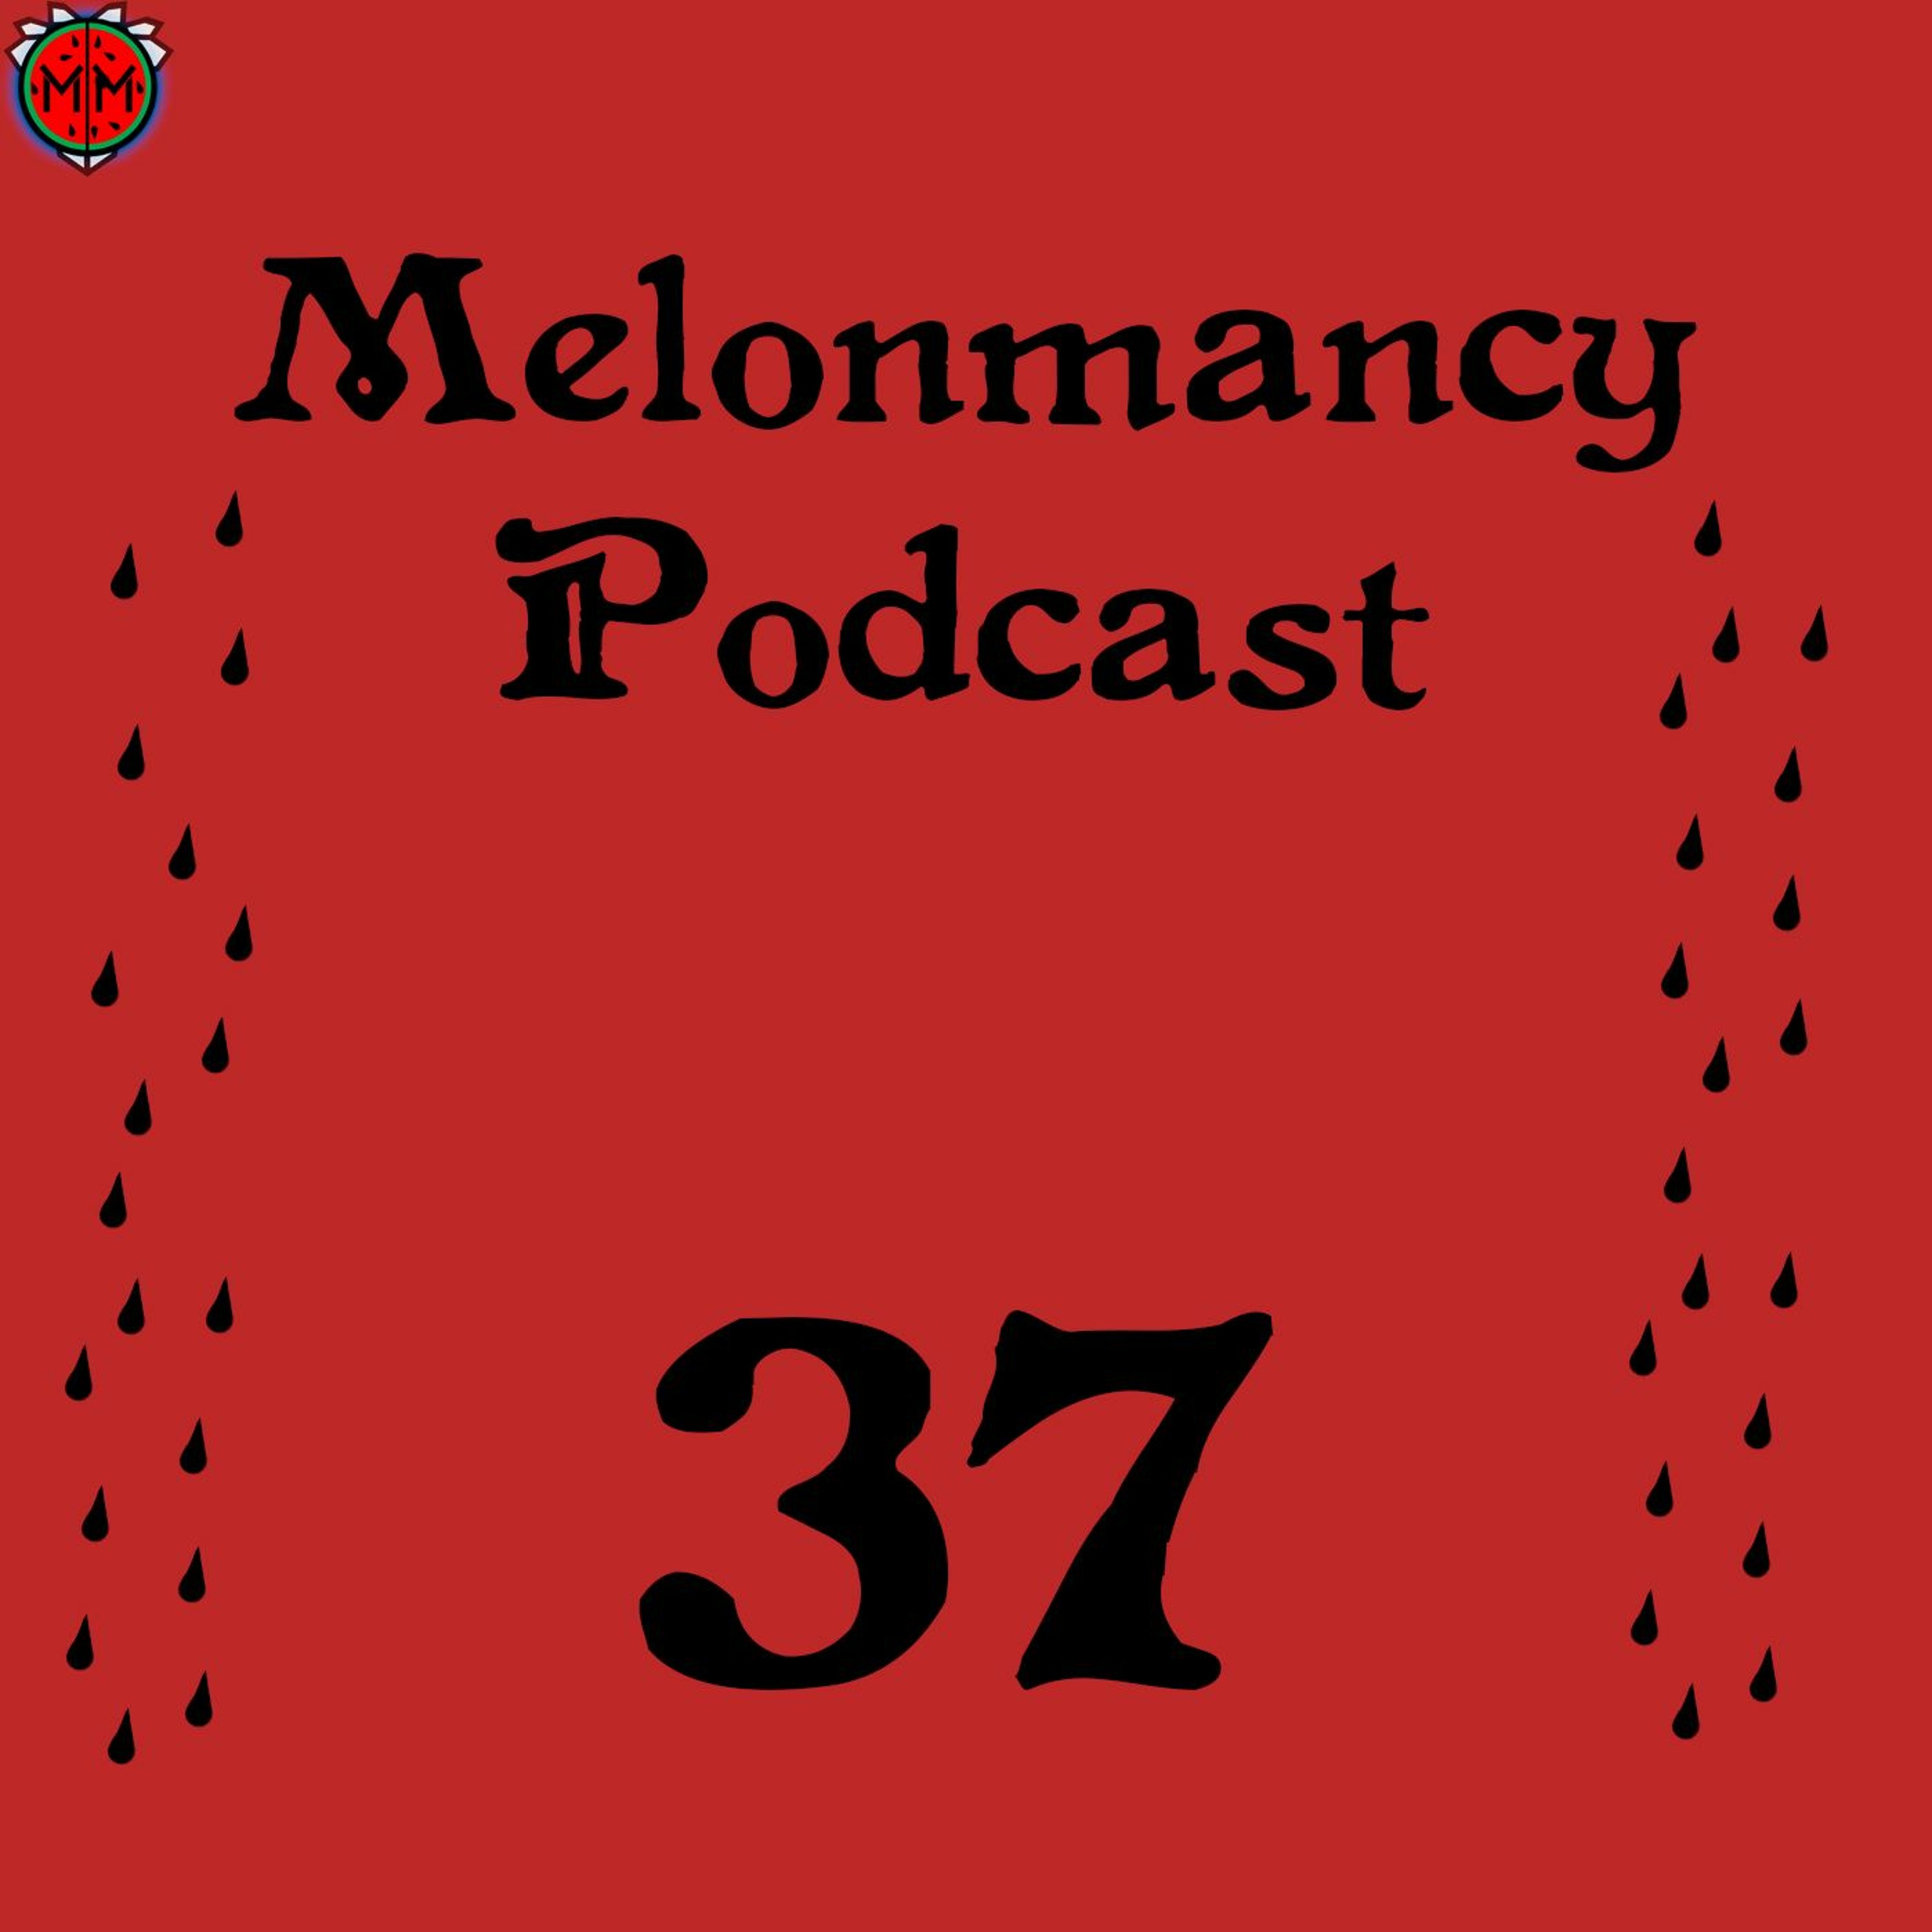 MP#37 - Entrapment isn't illegal on Sarge Island